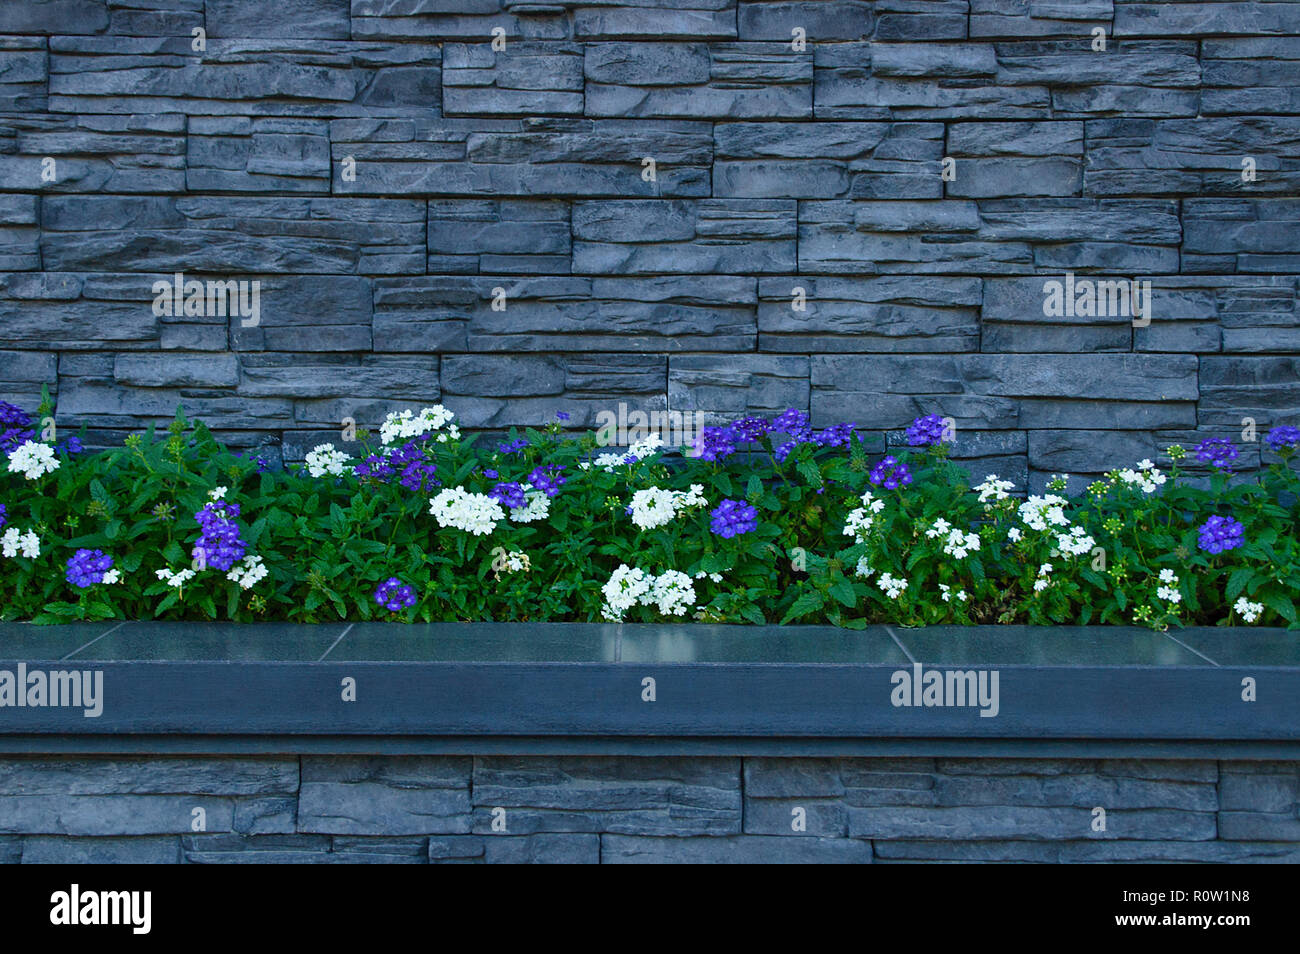 A wall made of decorative stone with a flower bed. Stock Photo